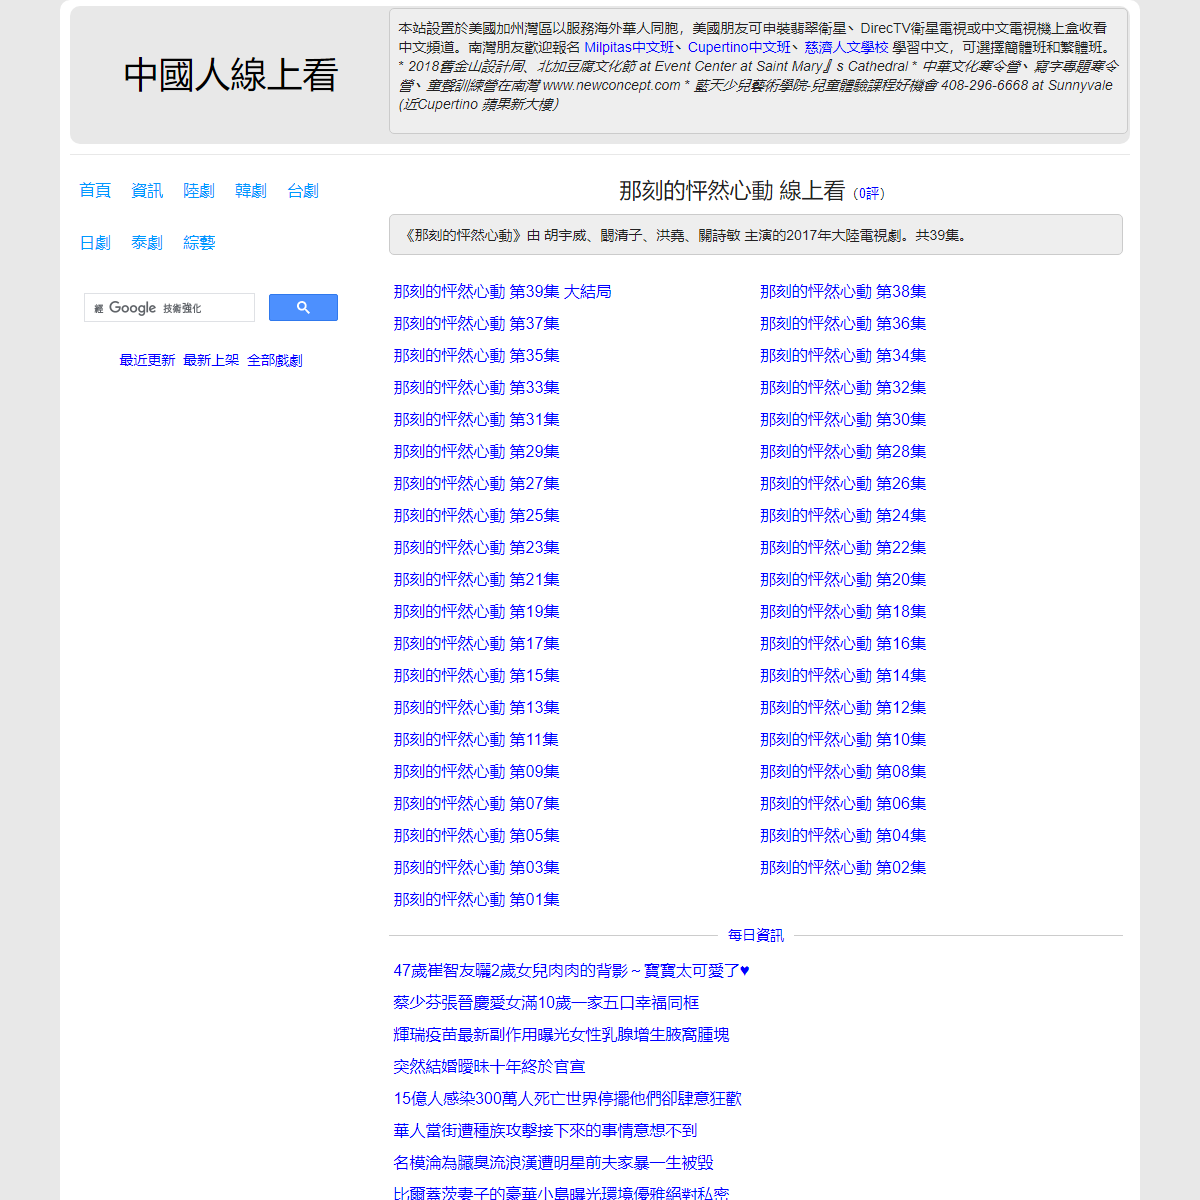 A complete backup of https://chinaq.tv/cn171218b/